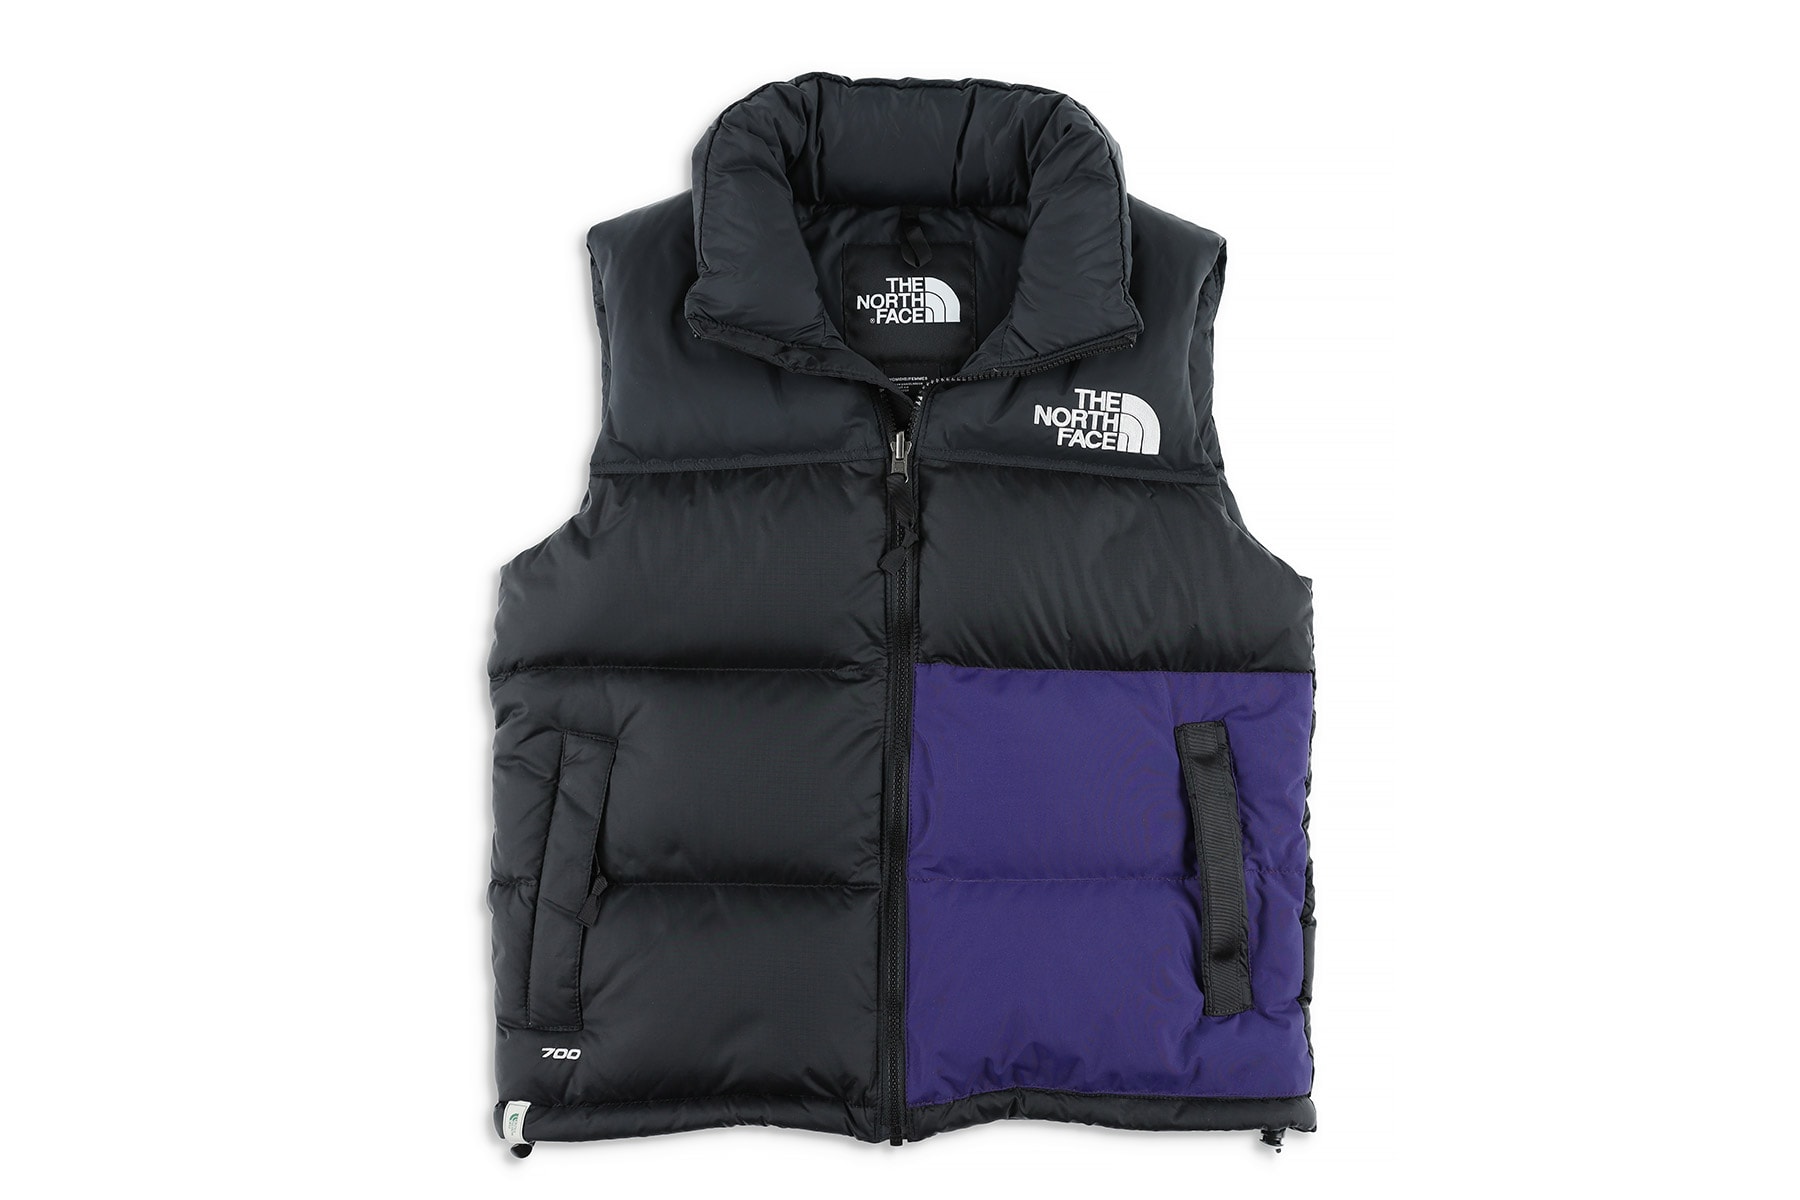 Men's REMADE Snow Jacket, The North Face